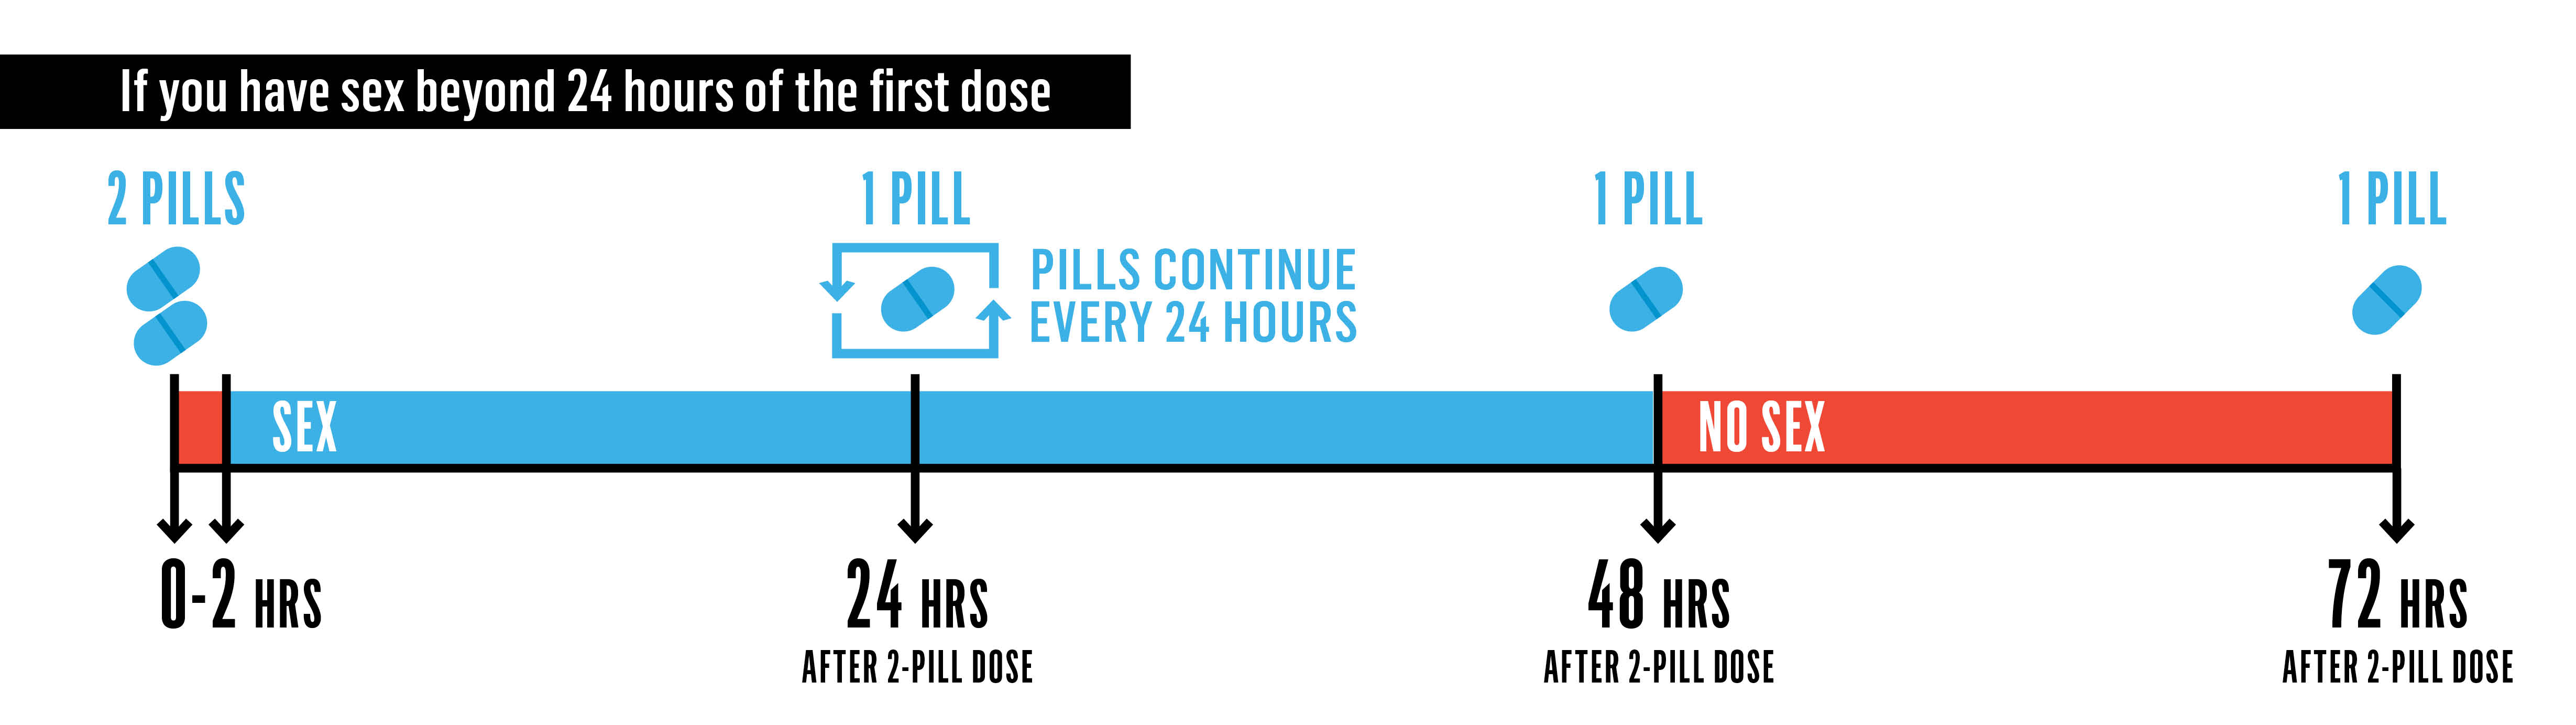 infographic visually explaining the timing of PrEP on-demand dosing